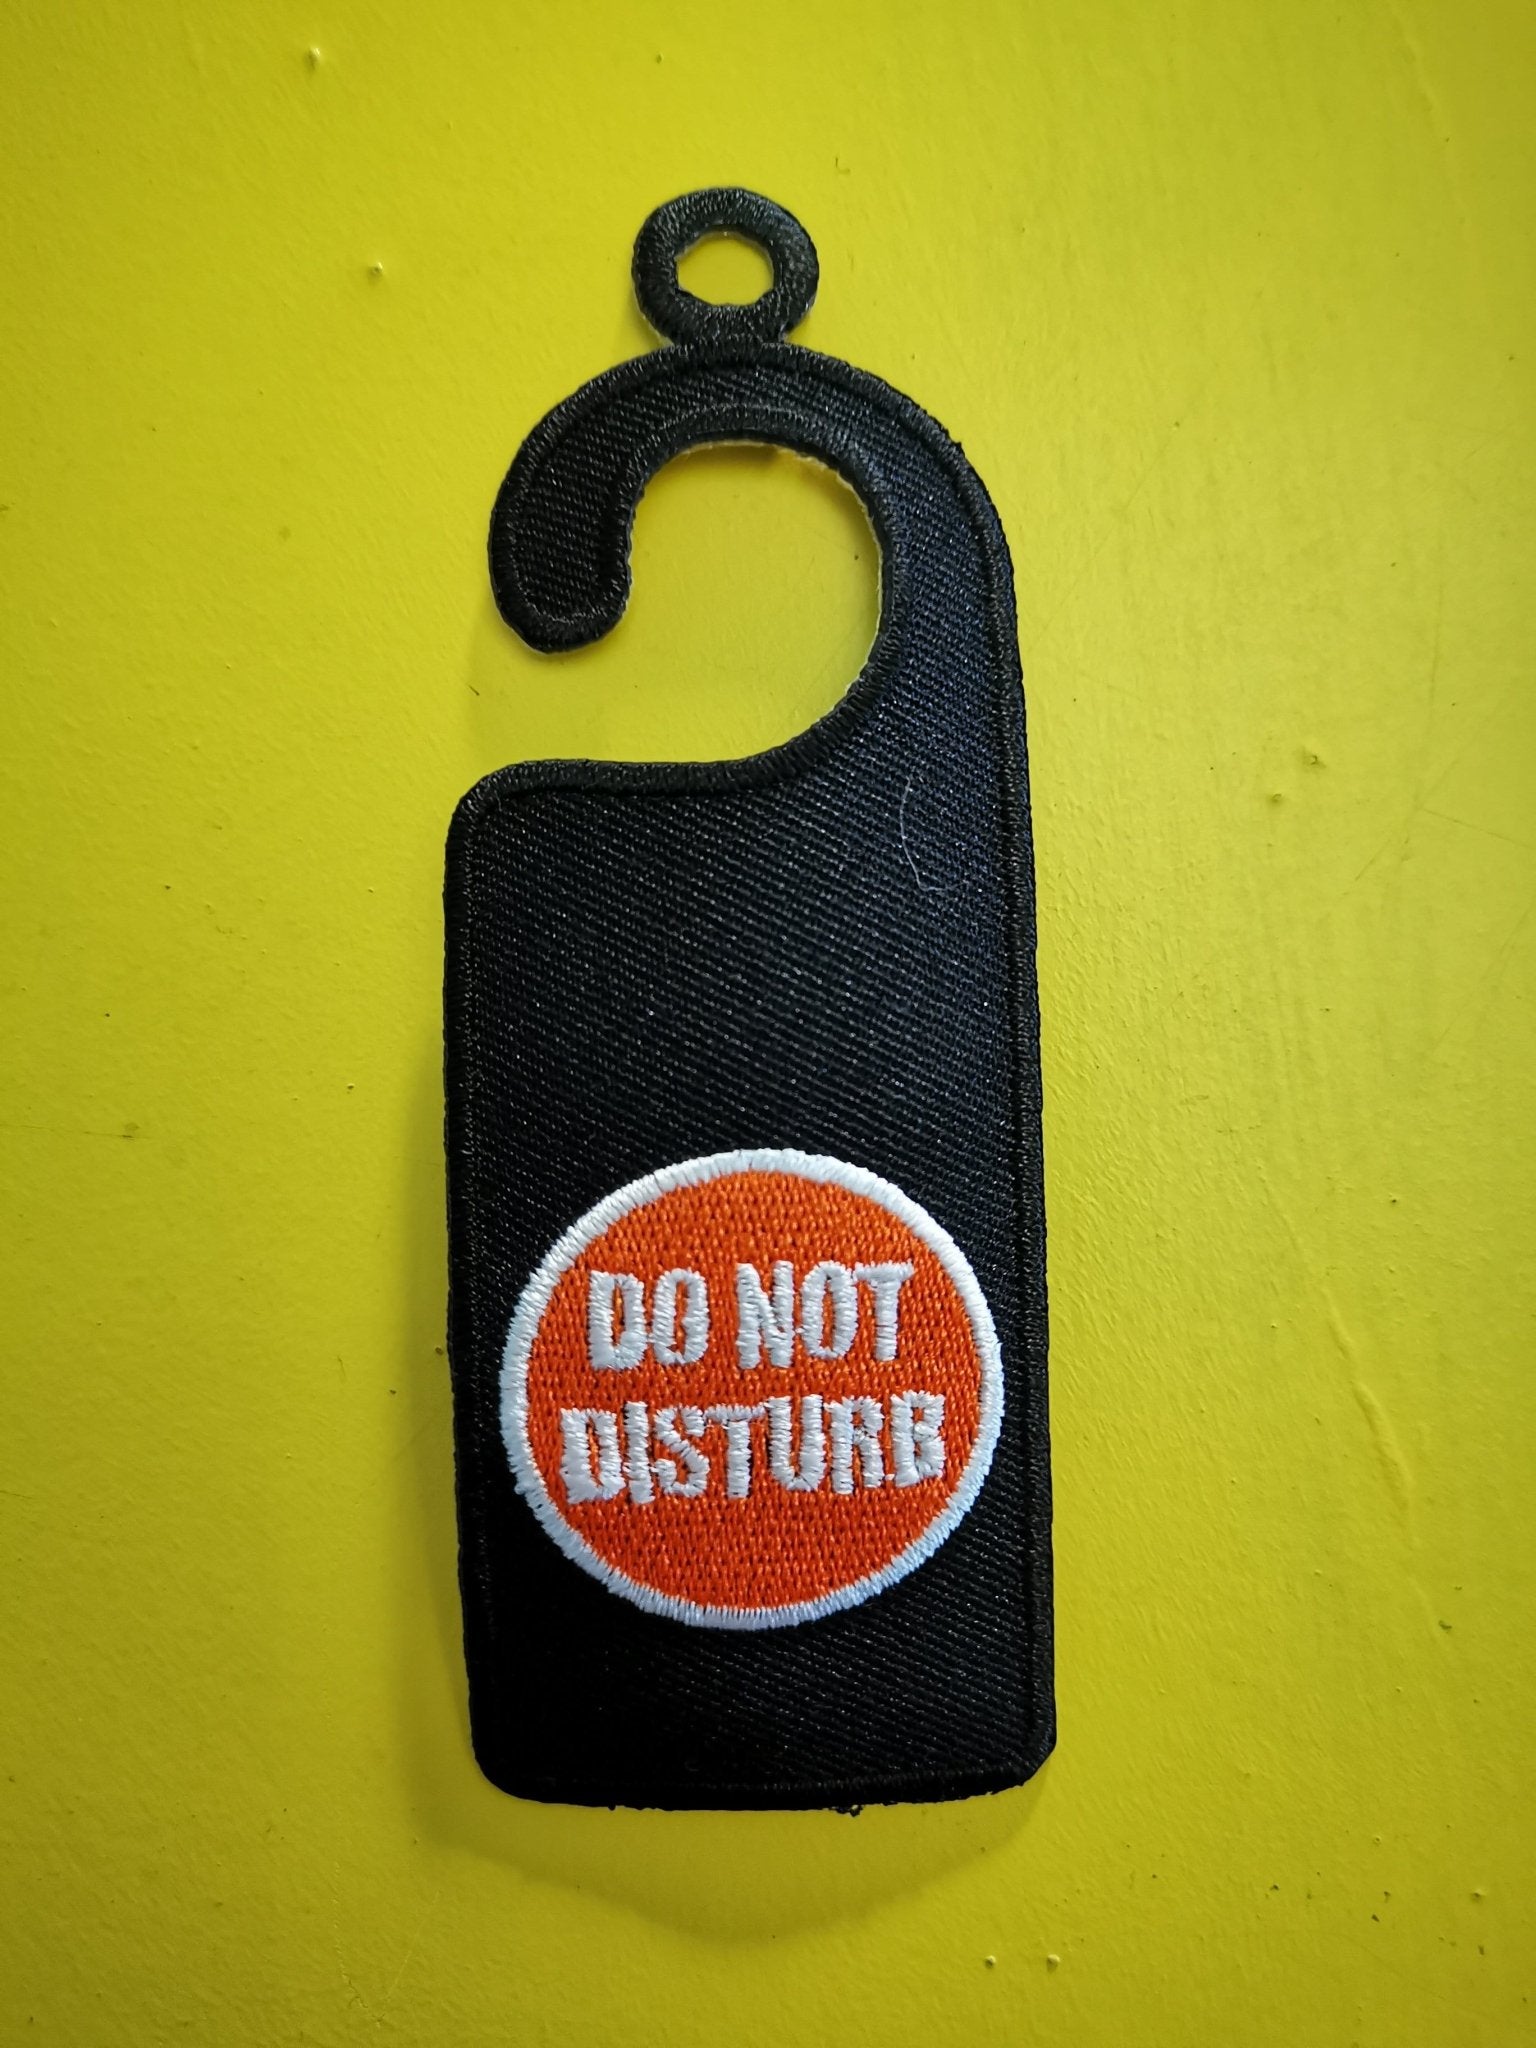 Do Not disturb Embroidered Iron on Patch